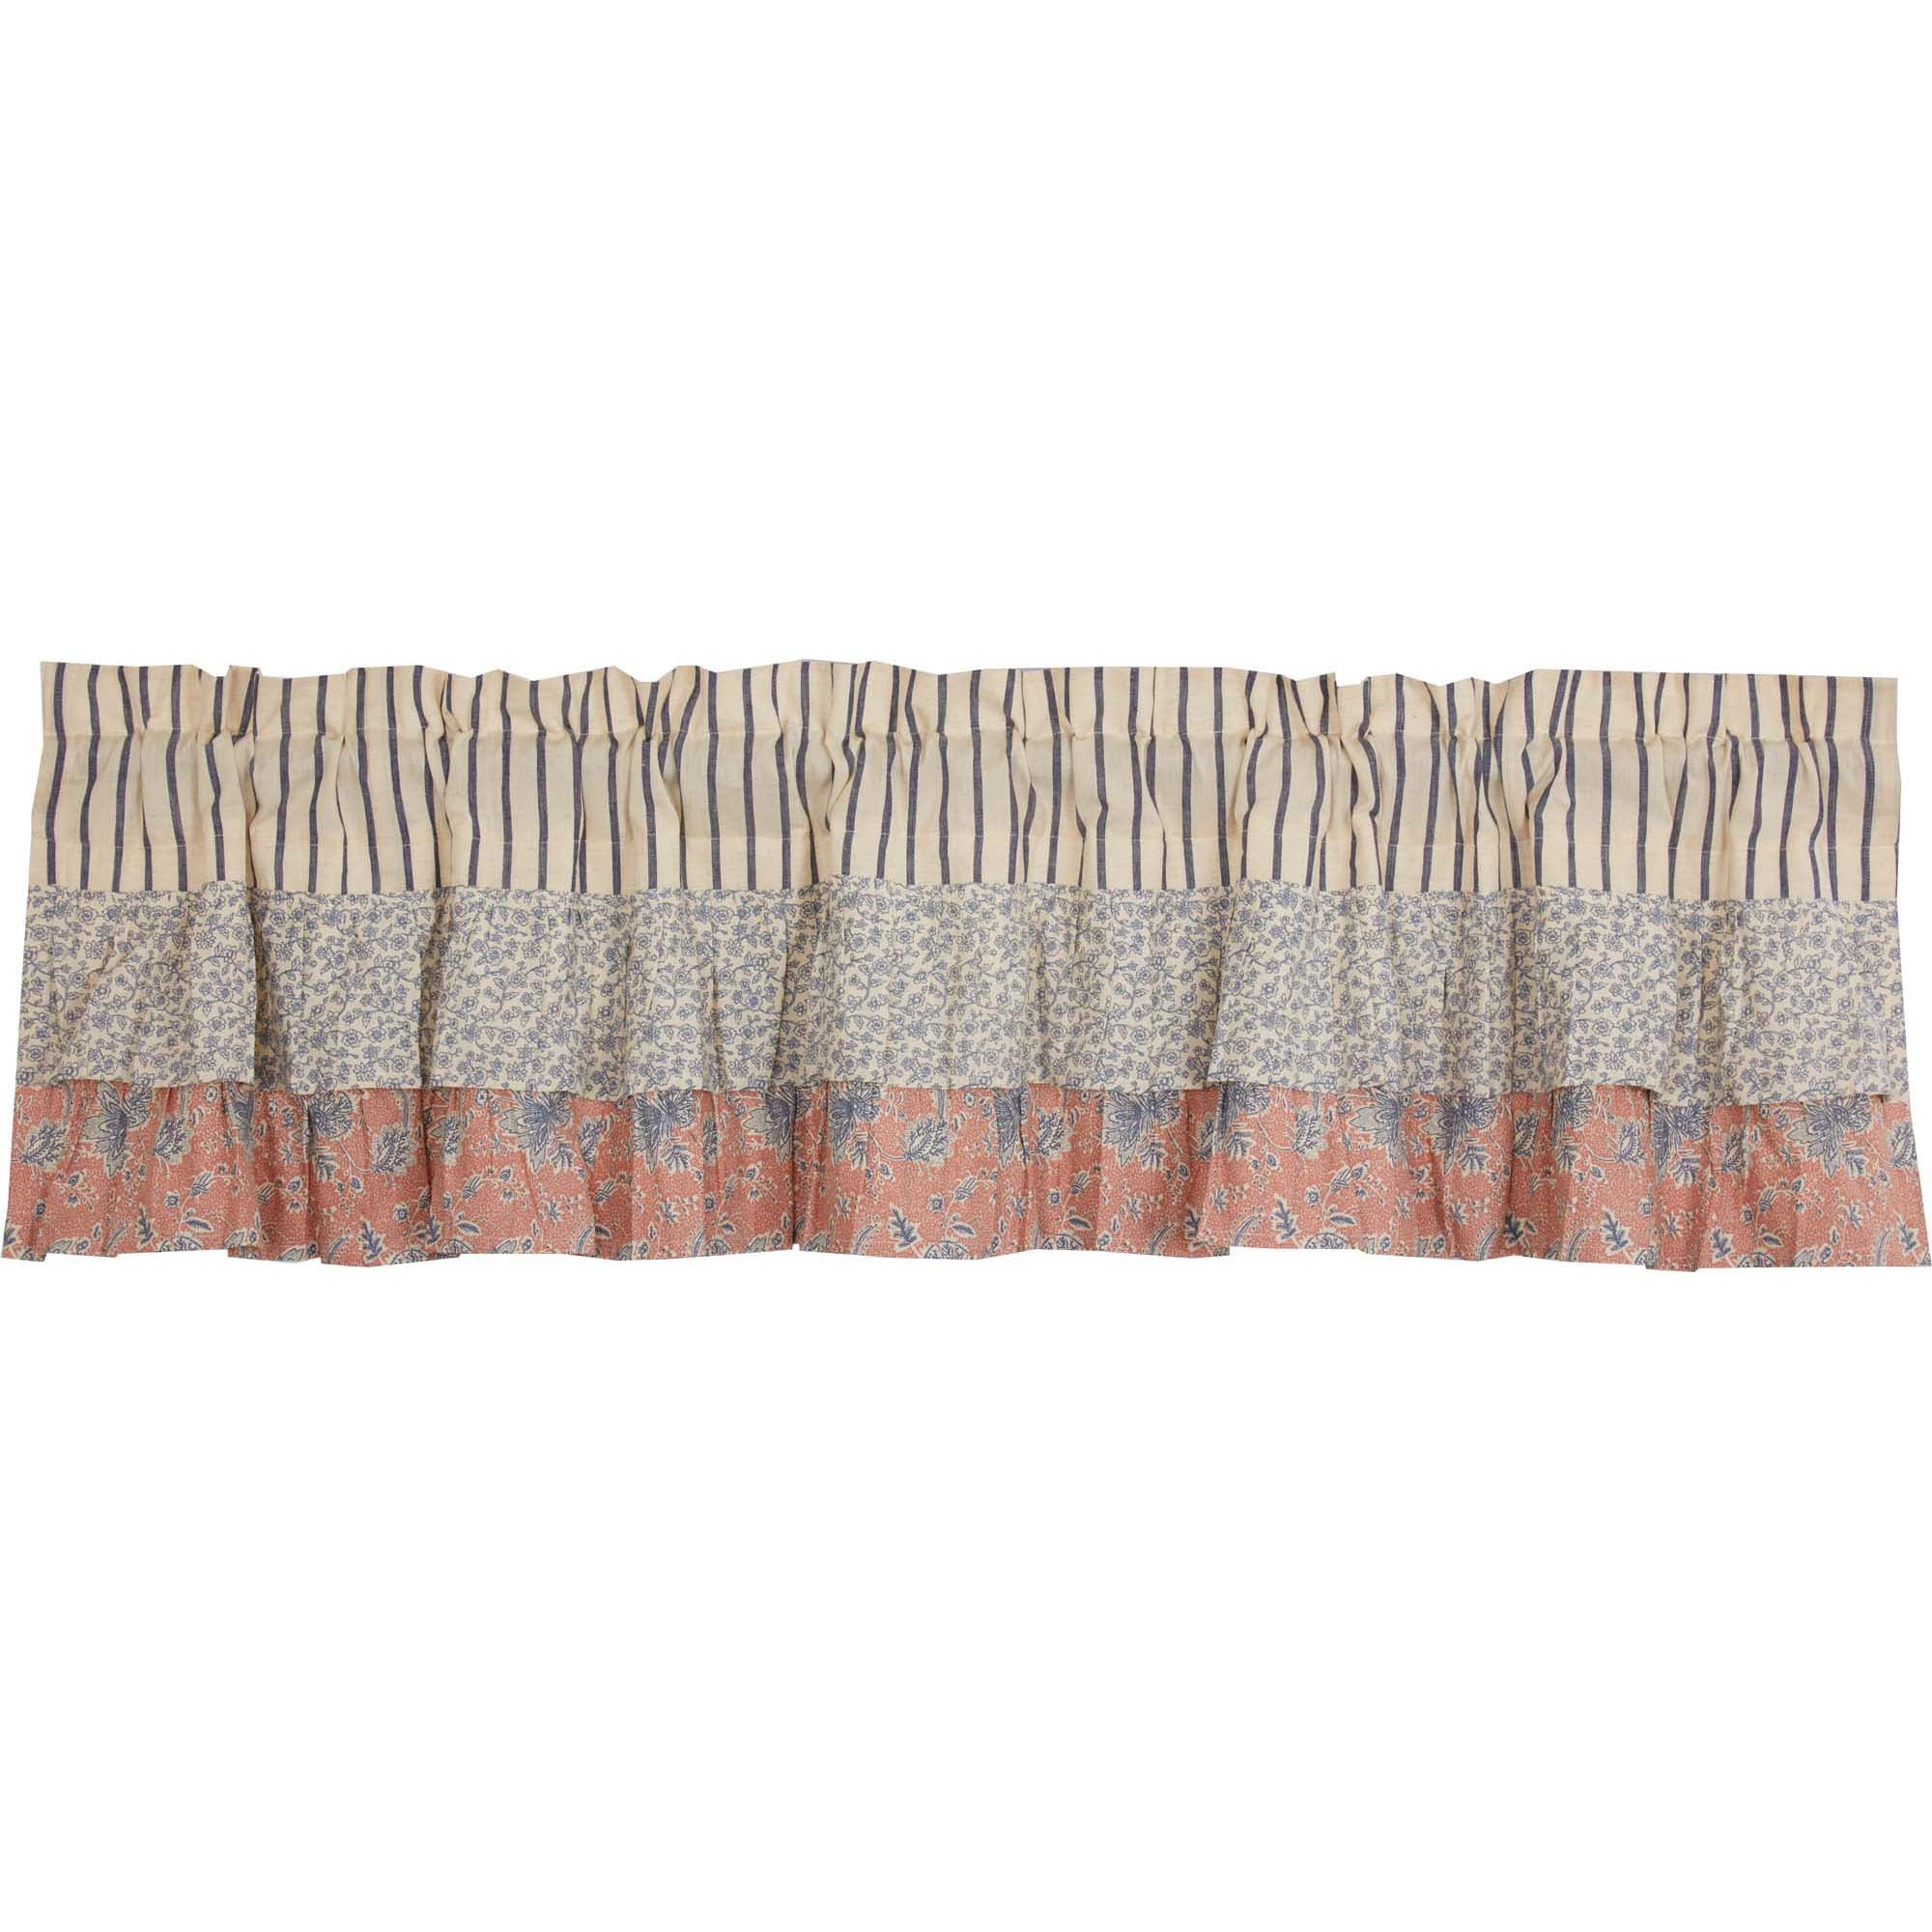 April & Olive Kaila Ticking Blue Ruffled Valance 16x72 By VHC Brands